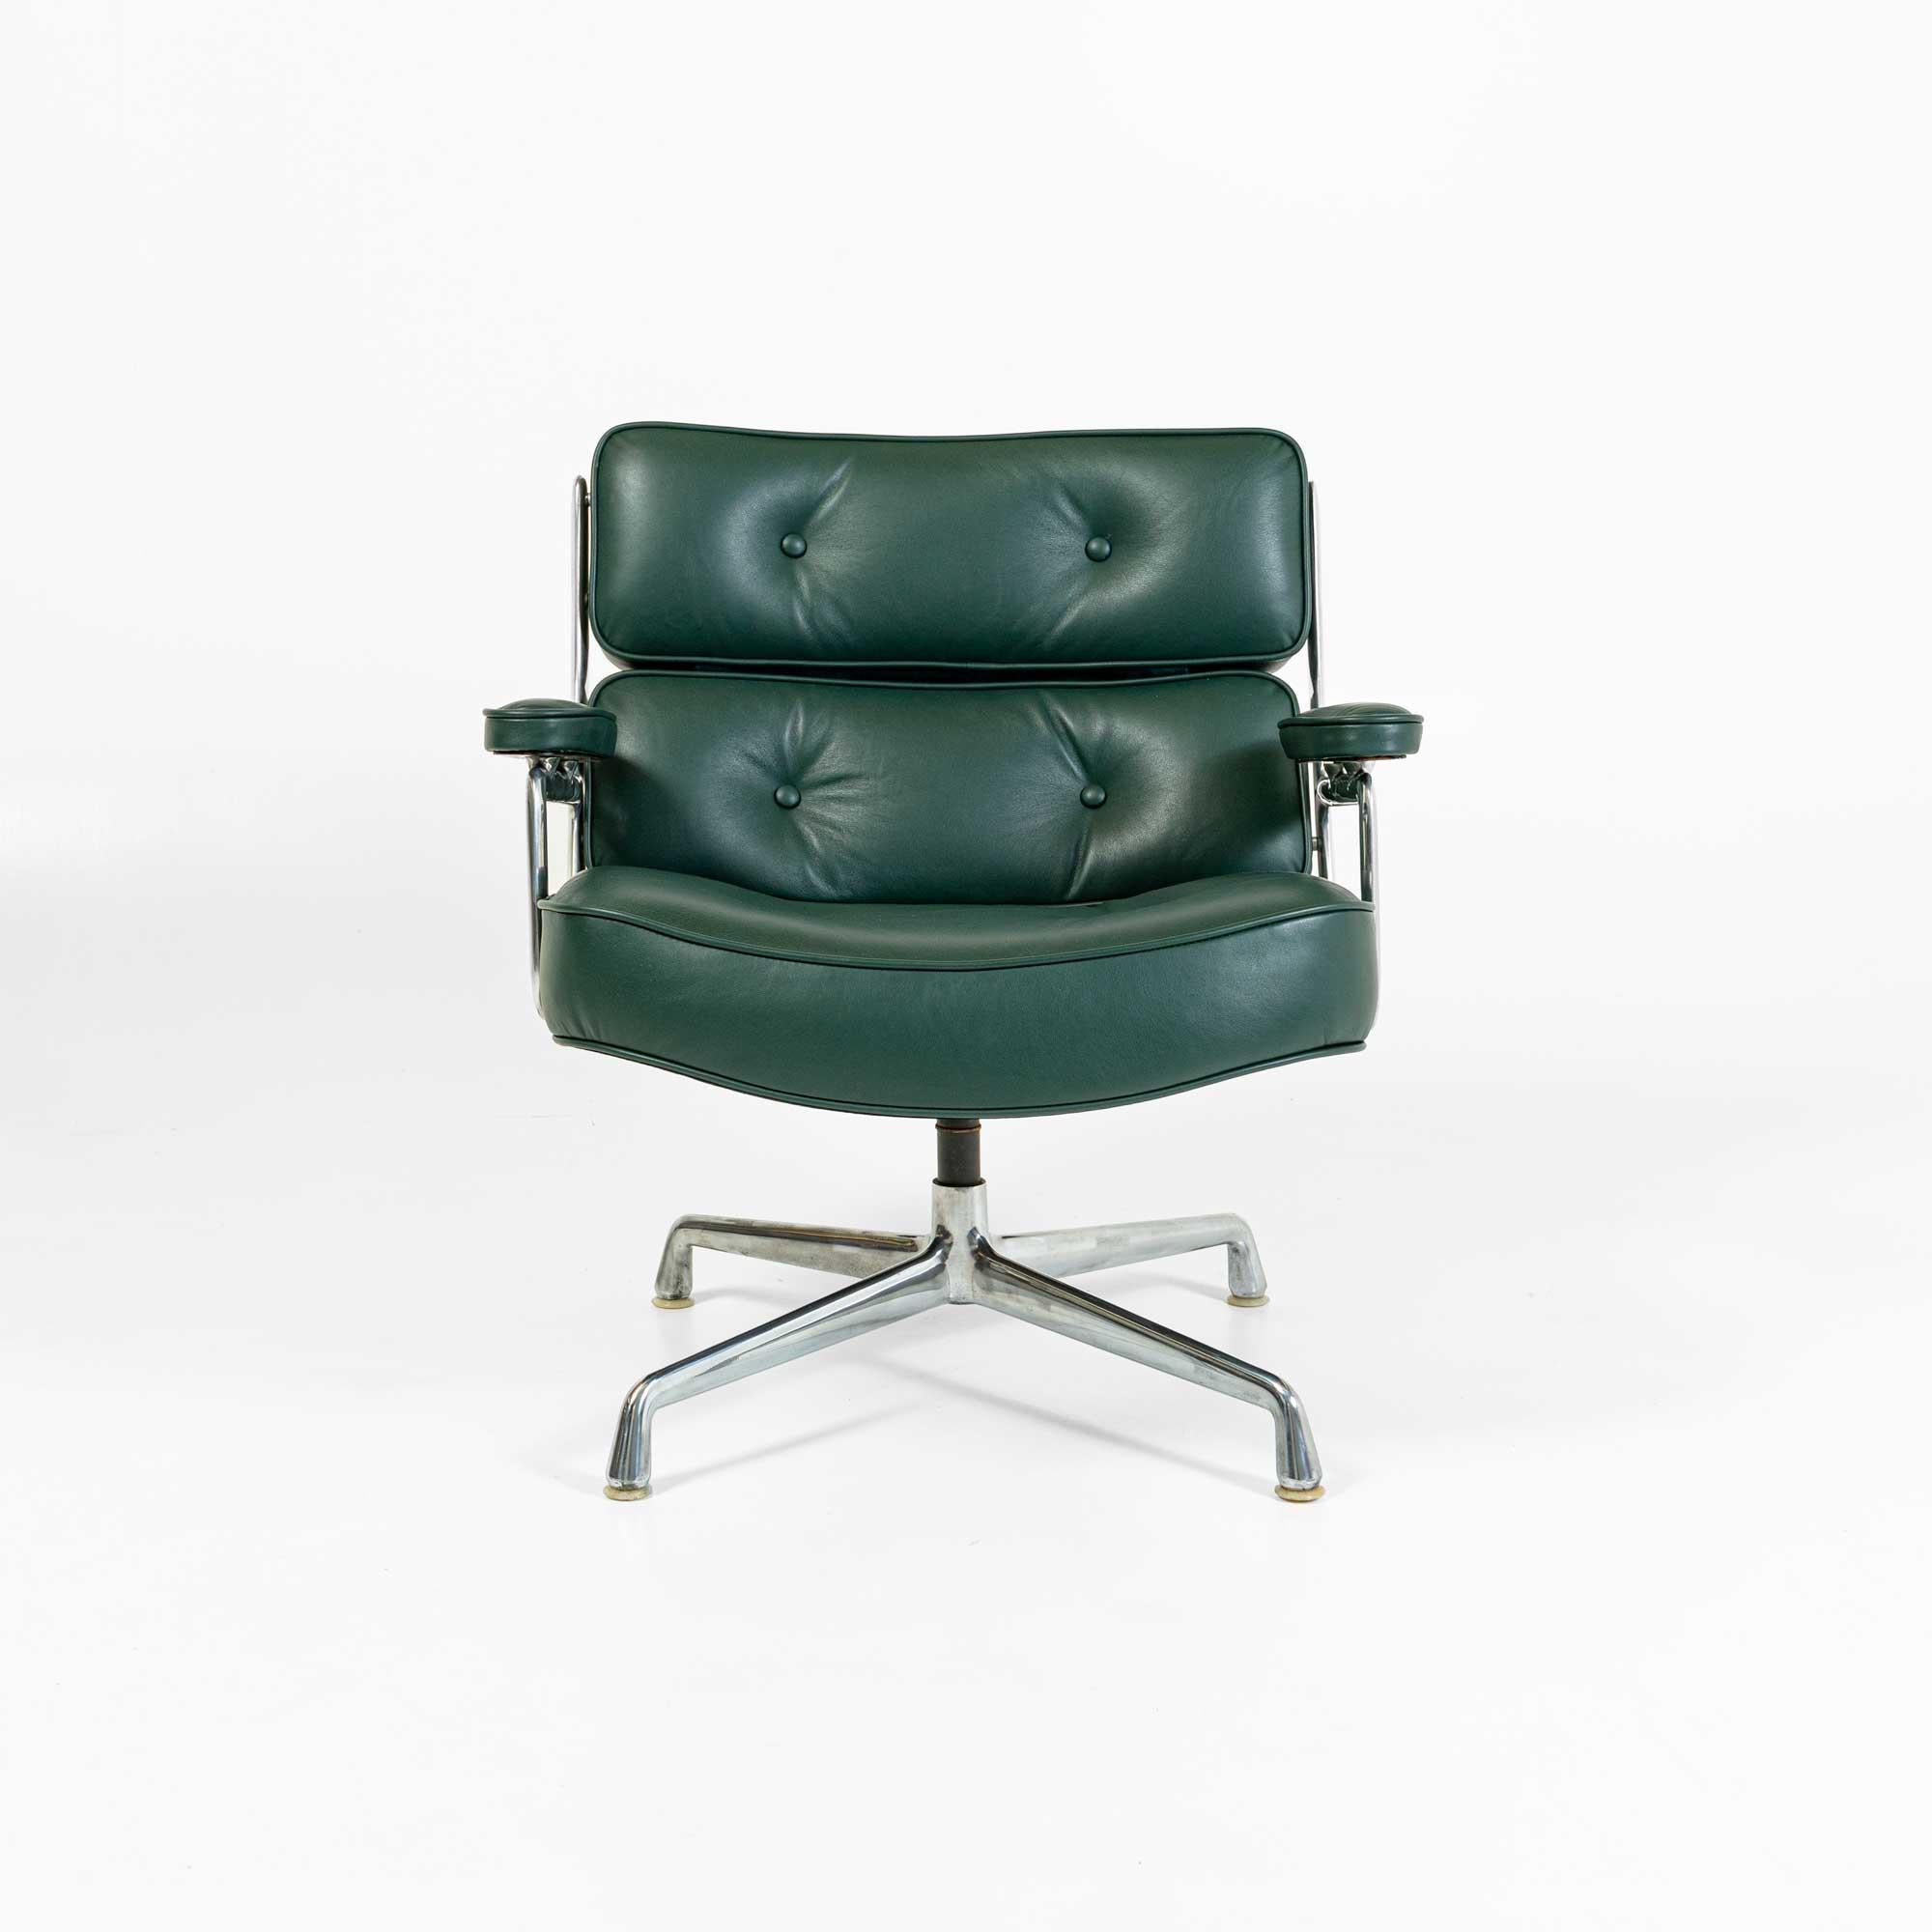 A newly restored Eames timelife Lobby chair, model ES105, reupholstered in Midnight Green Aniline Leather. Priced Individually, we currently have 2.

Eames Timelife Lobby chair is the adaptation of the specially commissioned 'Lobby Chairs' for the